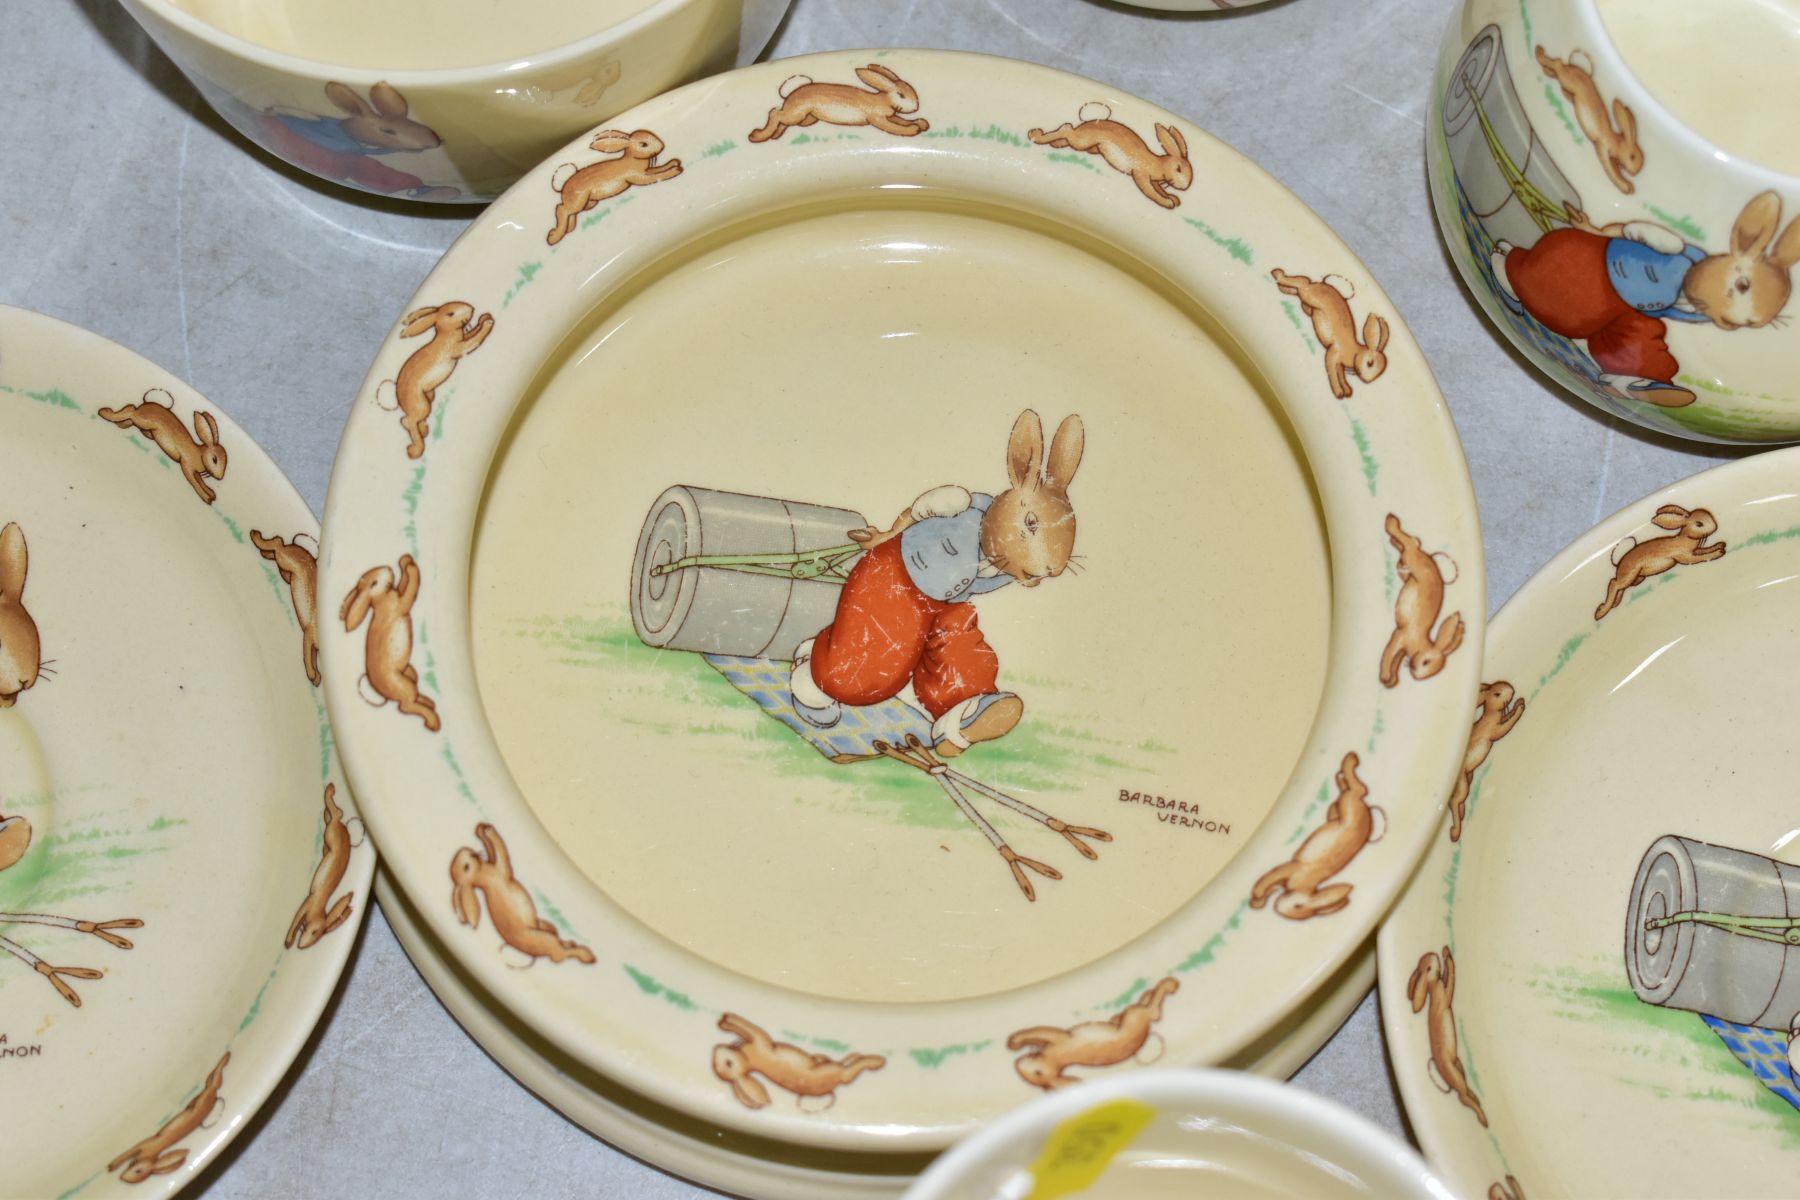 THIRTEEN PIECES OF ROYAL DOULTON BUNNYKINS EARTHENWARE TABLEWARES OF PRESSING TROUSERS SCENE HW14 BY - Image 5 of 13